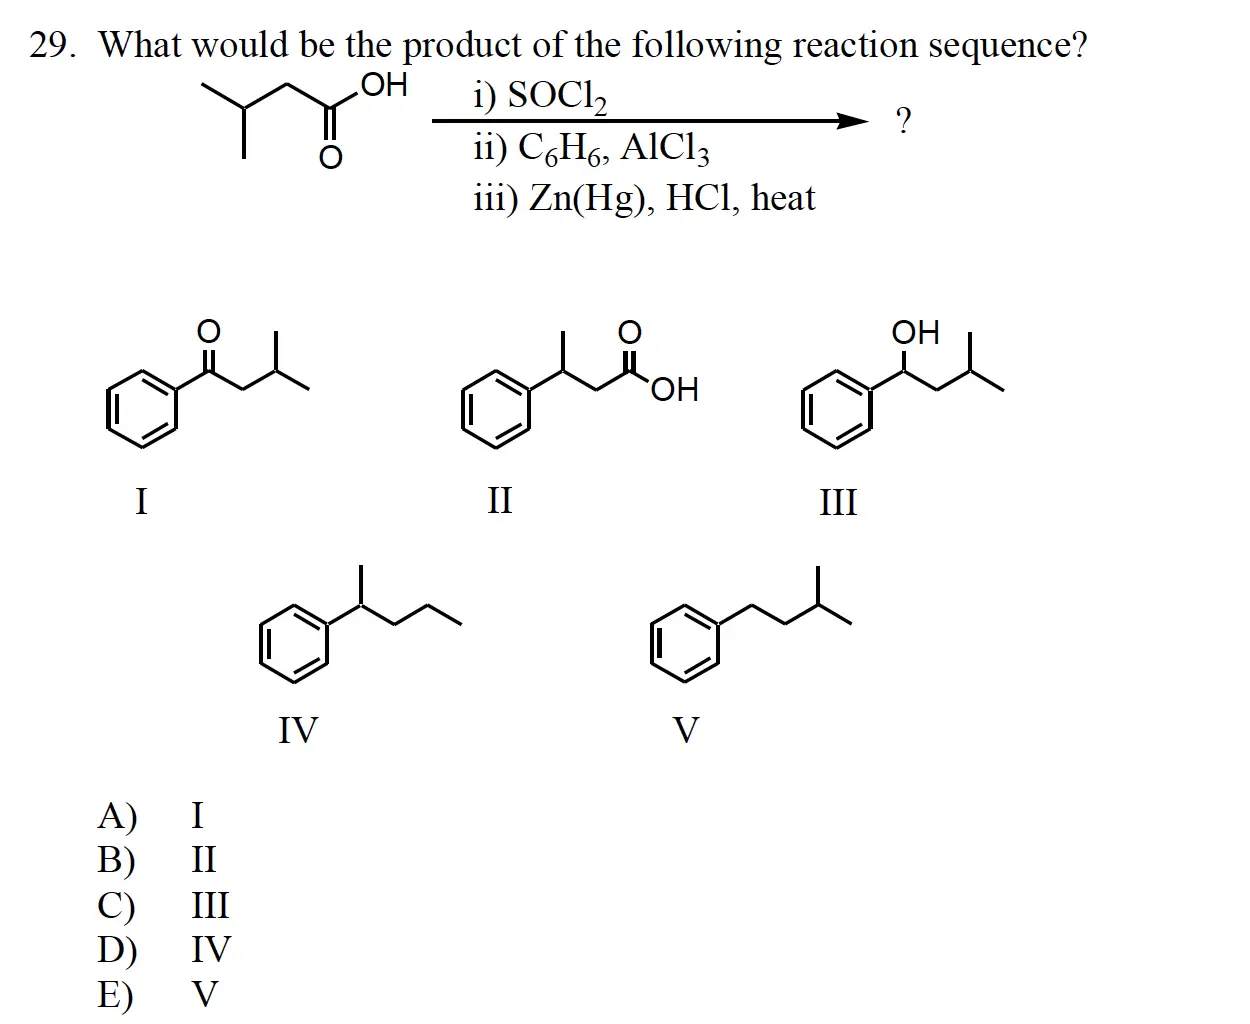 What would be the product of the following reaction sequence?
Please show the mechanism.

What would be the product of the following reaction sequence?